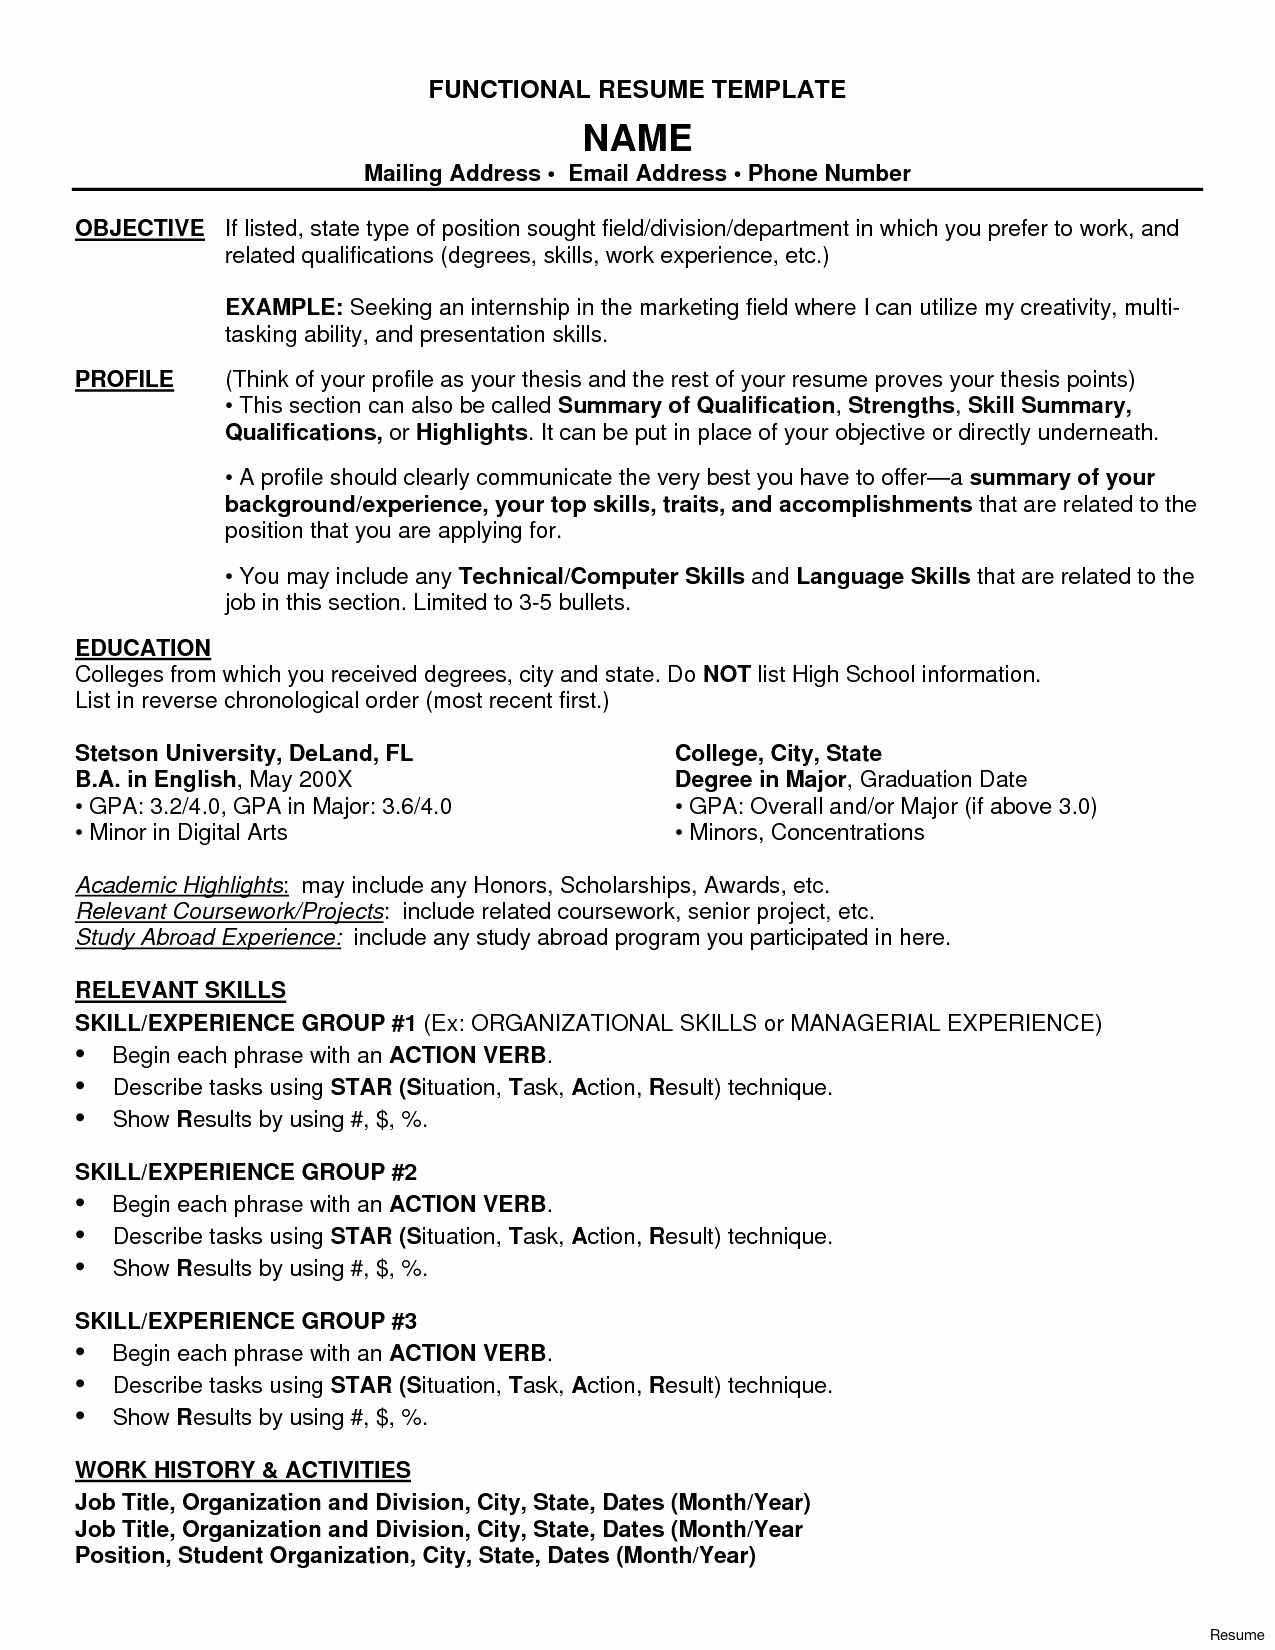 College Resume Template Resume Template No College Education Cool Gallery Education Resume